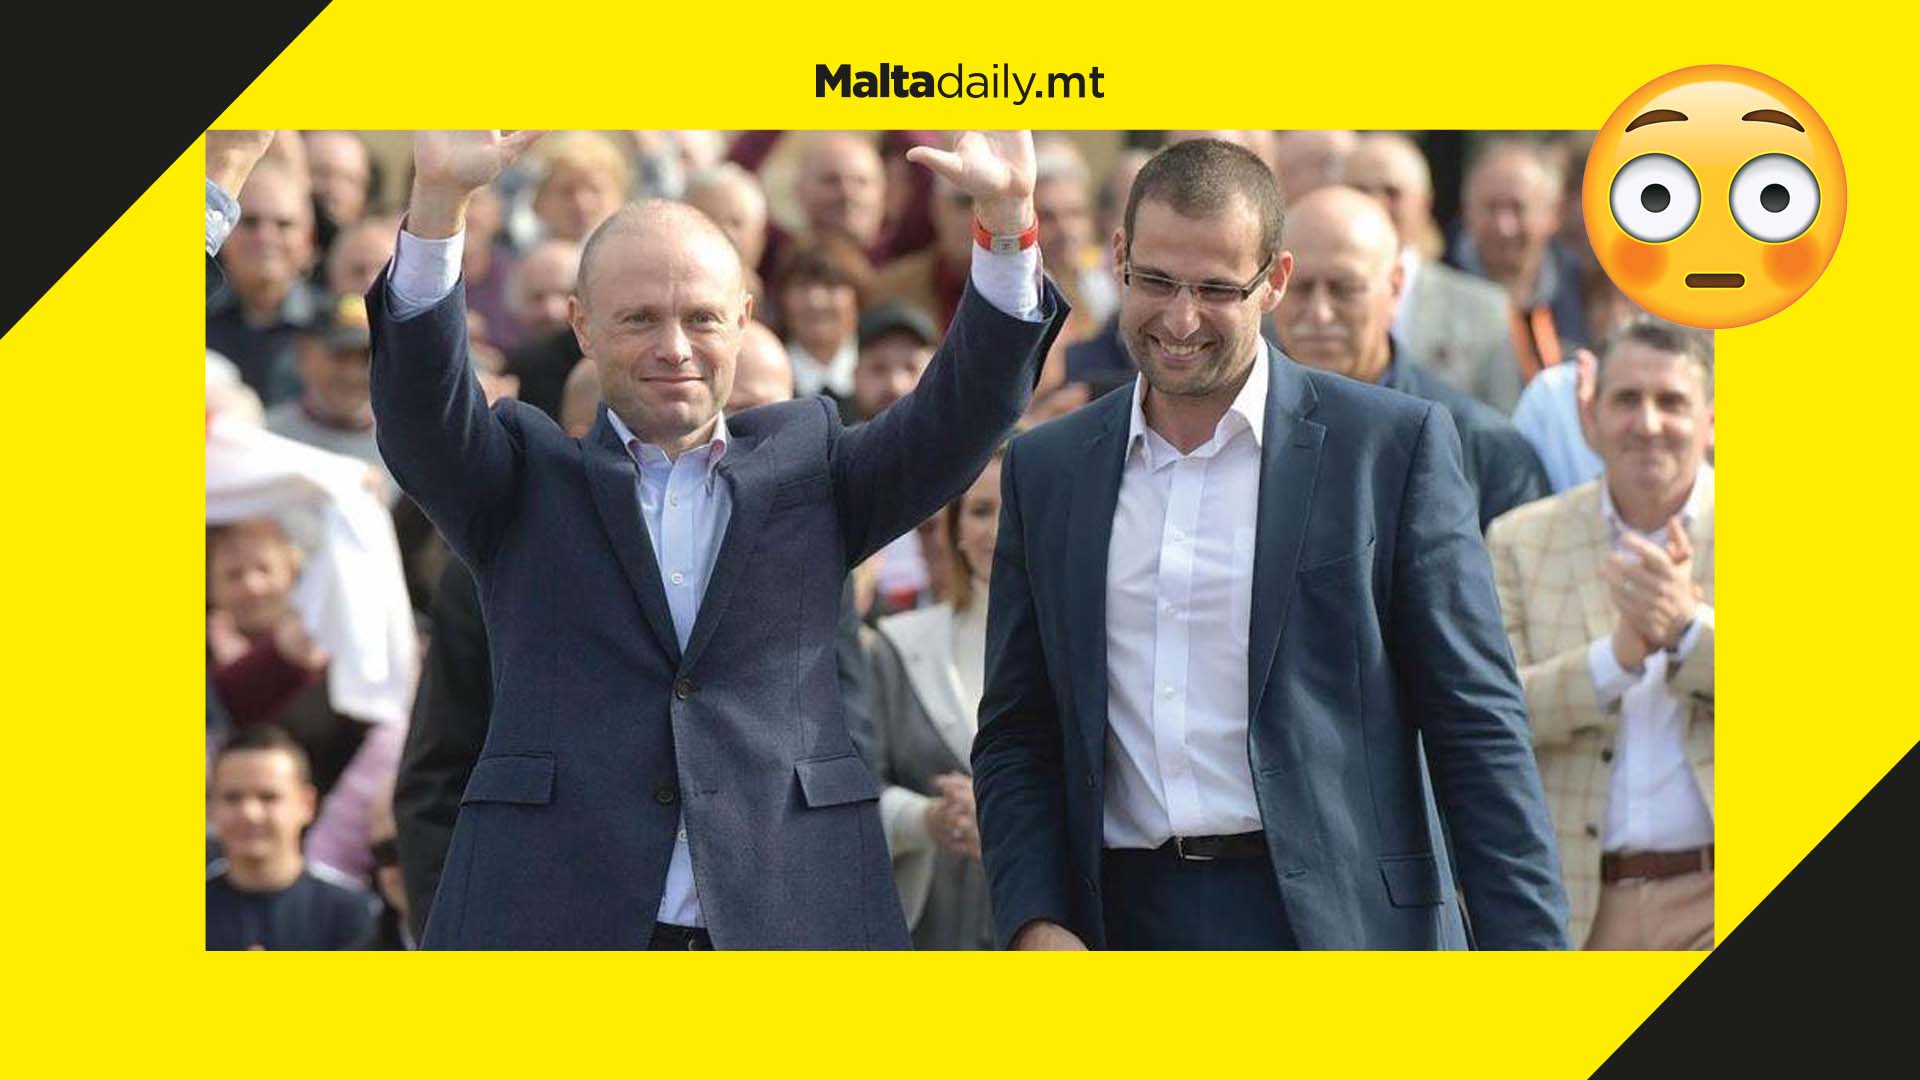 One third of Labour voters prefer Joseph Muscat to Abela